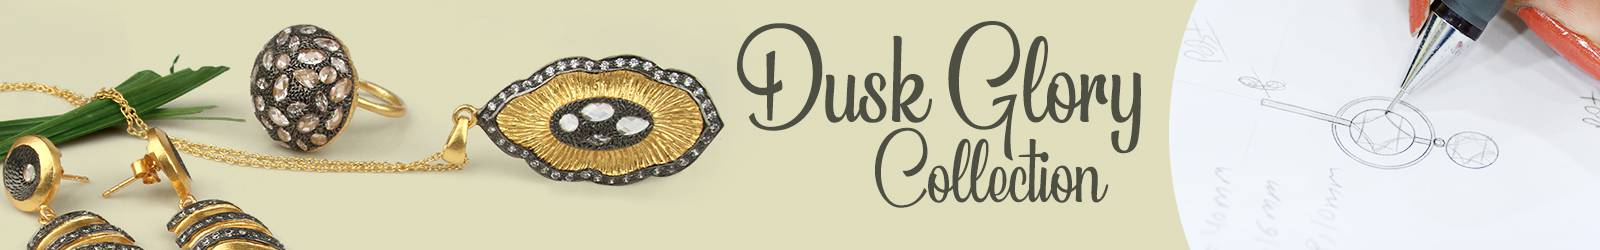 Dusky glory jewelry collection